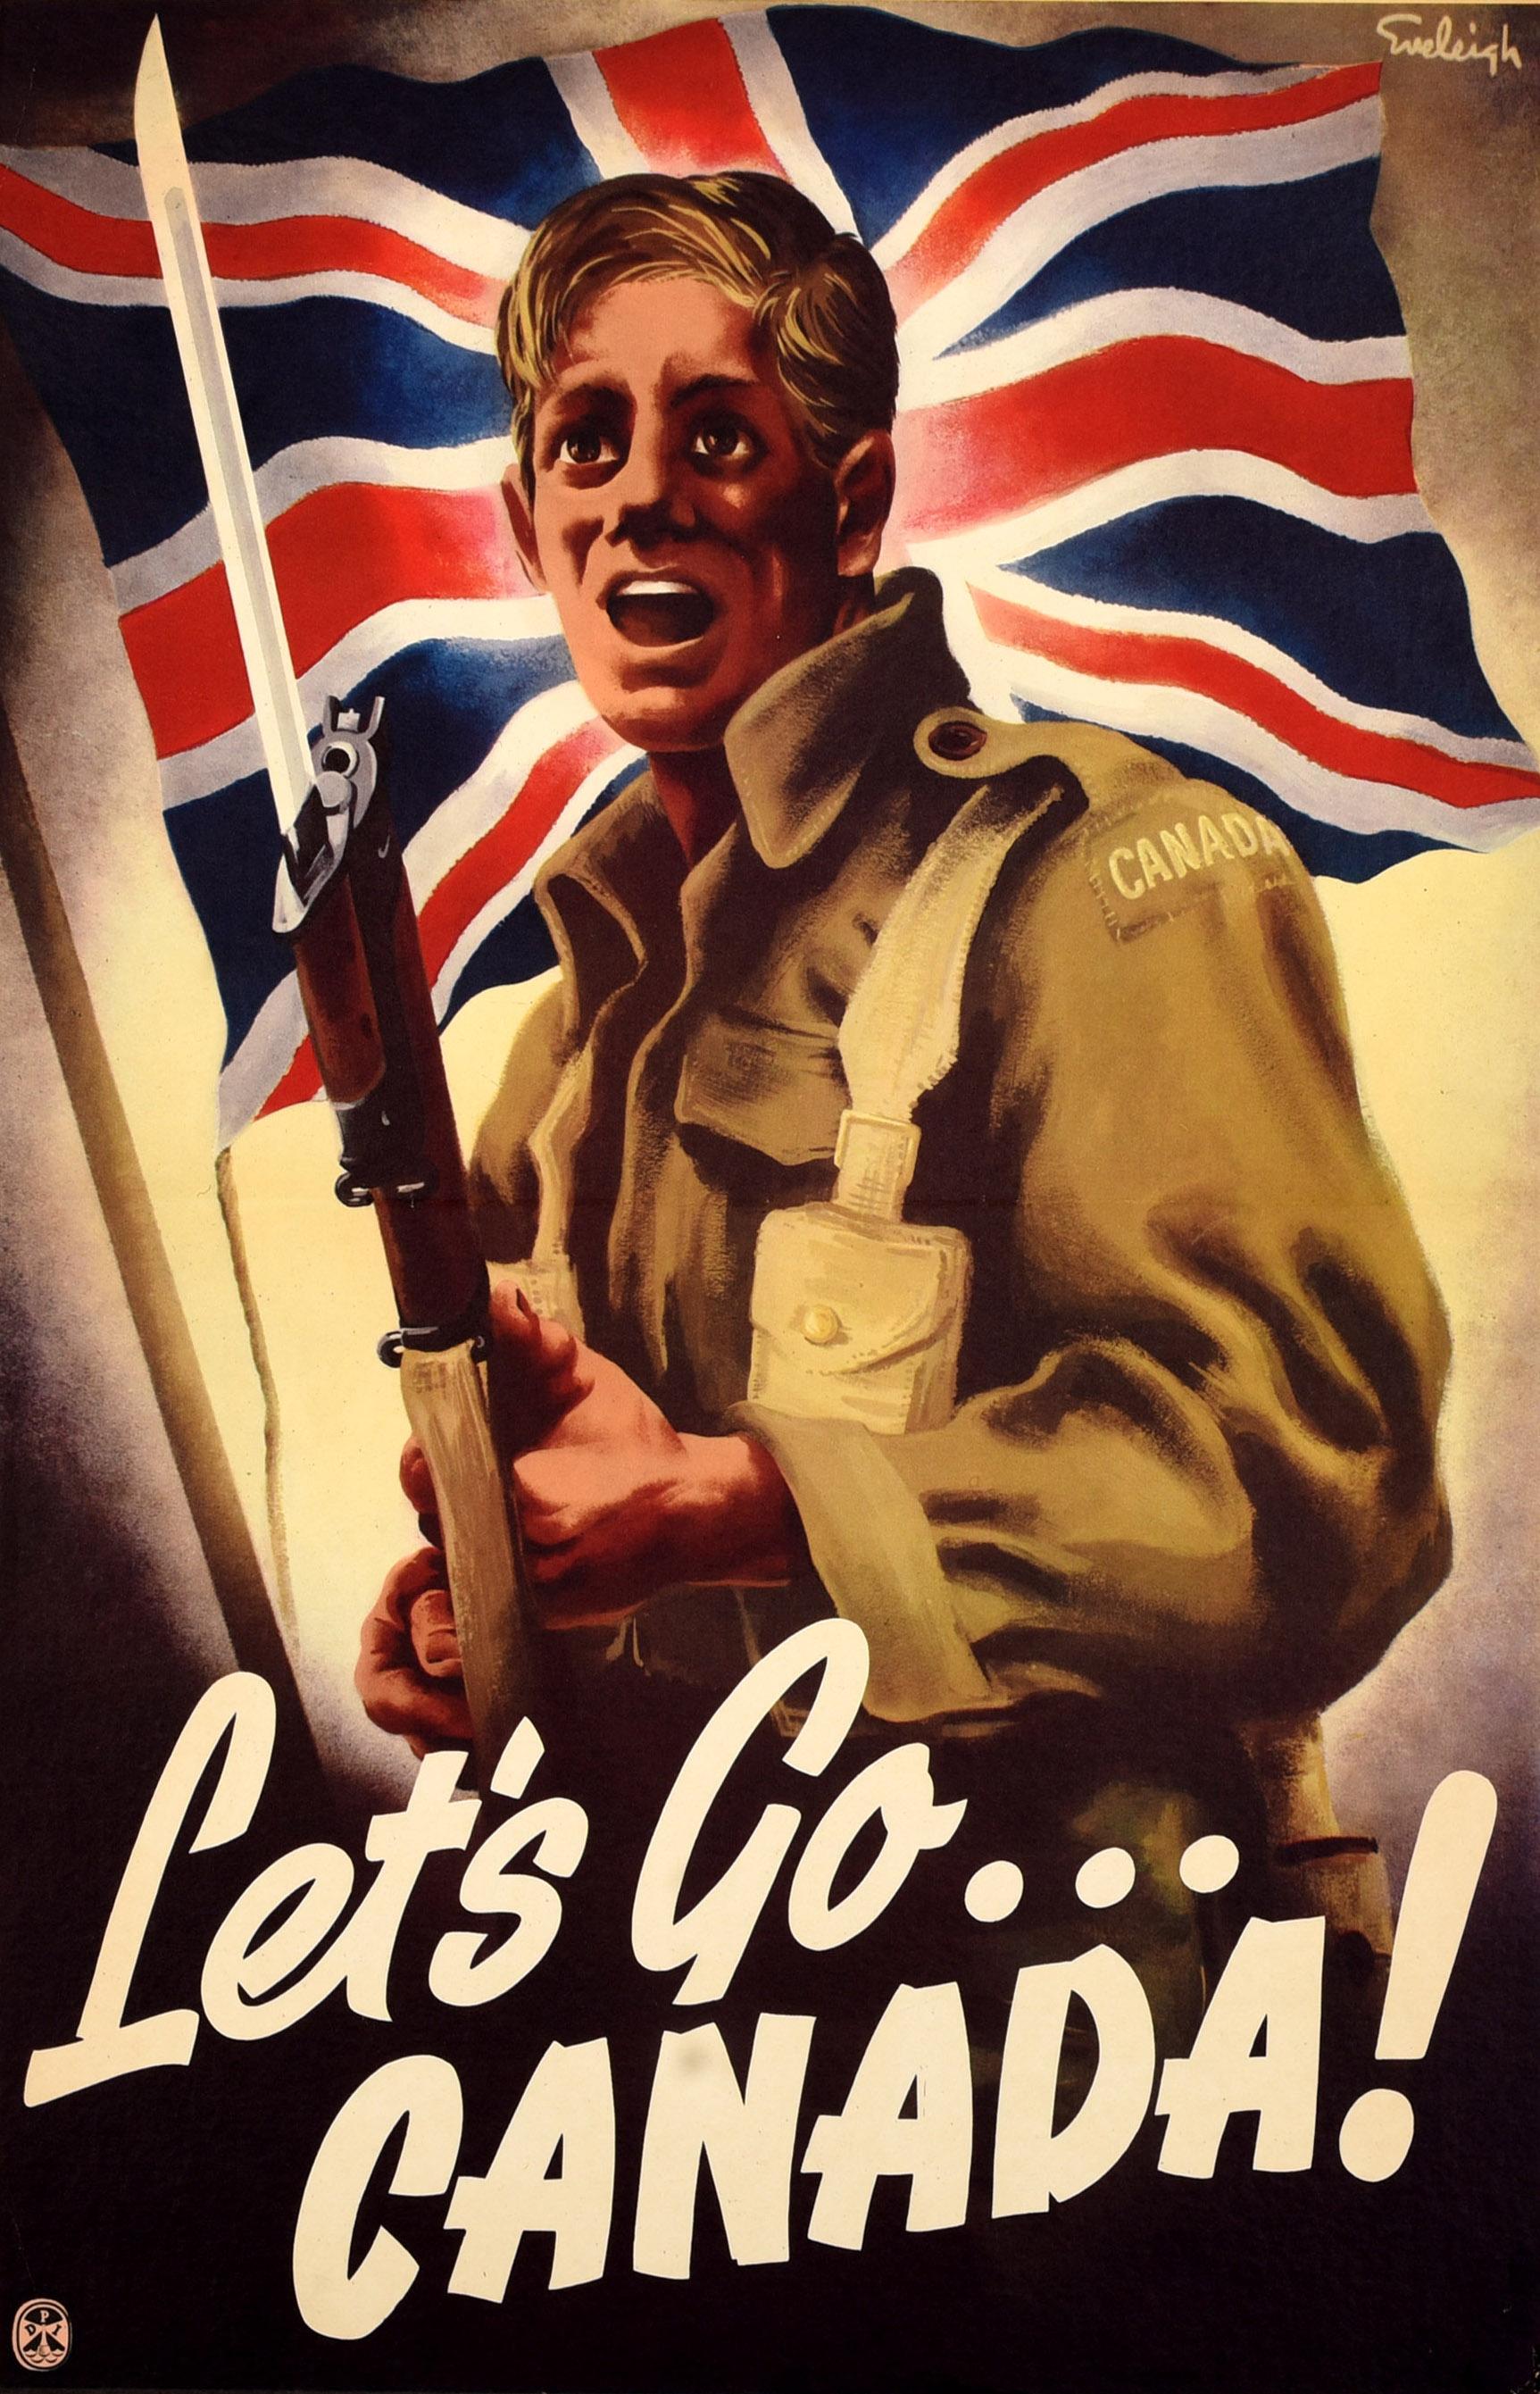 Original vintage Canadian World War Two propaganda poster - Let's Go... Canada! - issued by the director of public information under the authority of Hon J.T Thorson Minister of National War Services Ottawa. Dynamic design depicting a soldier in a